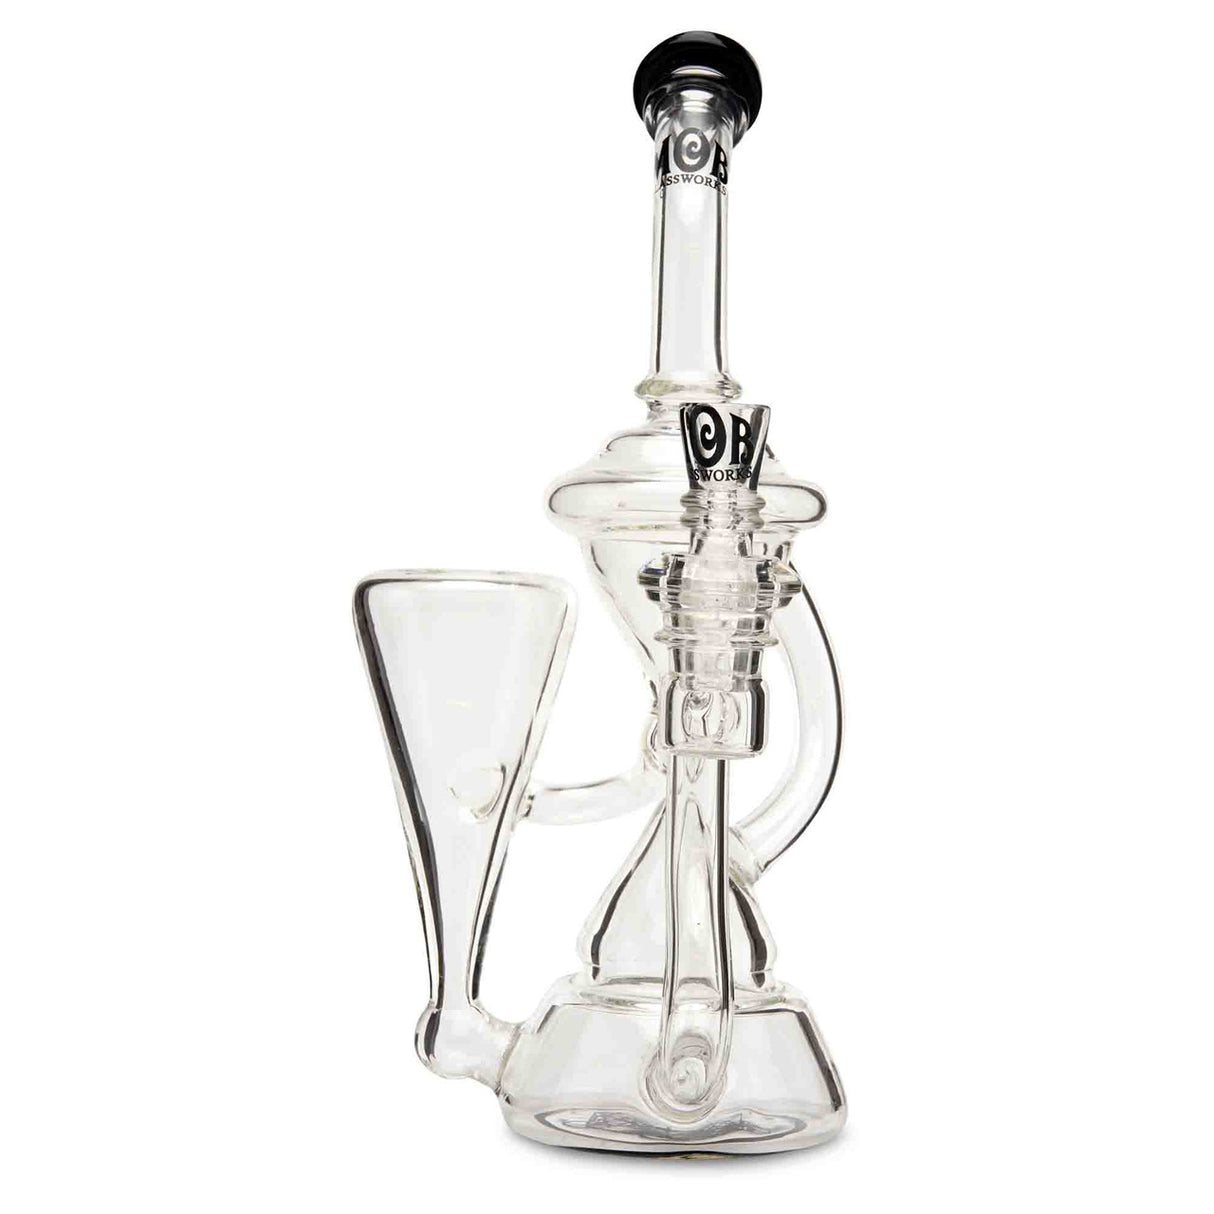 MOB Glass Zenith Recycler black concentrate dab rig